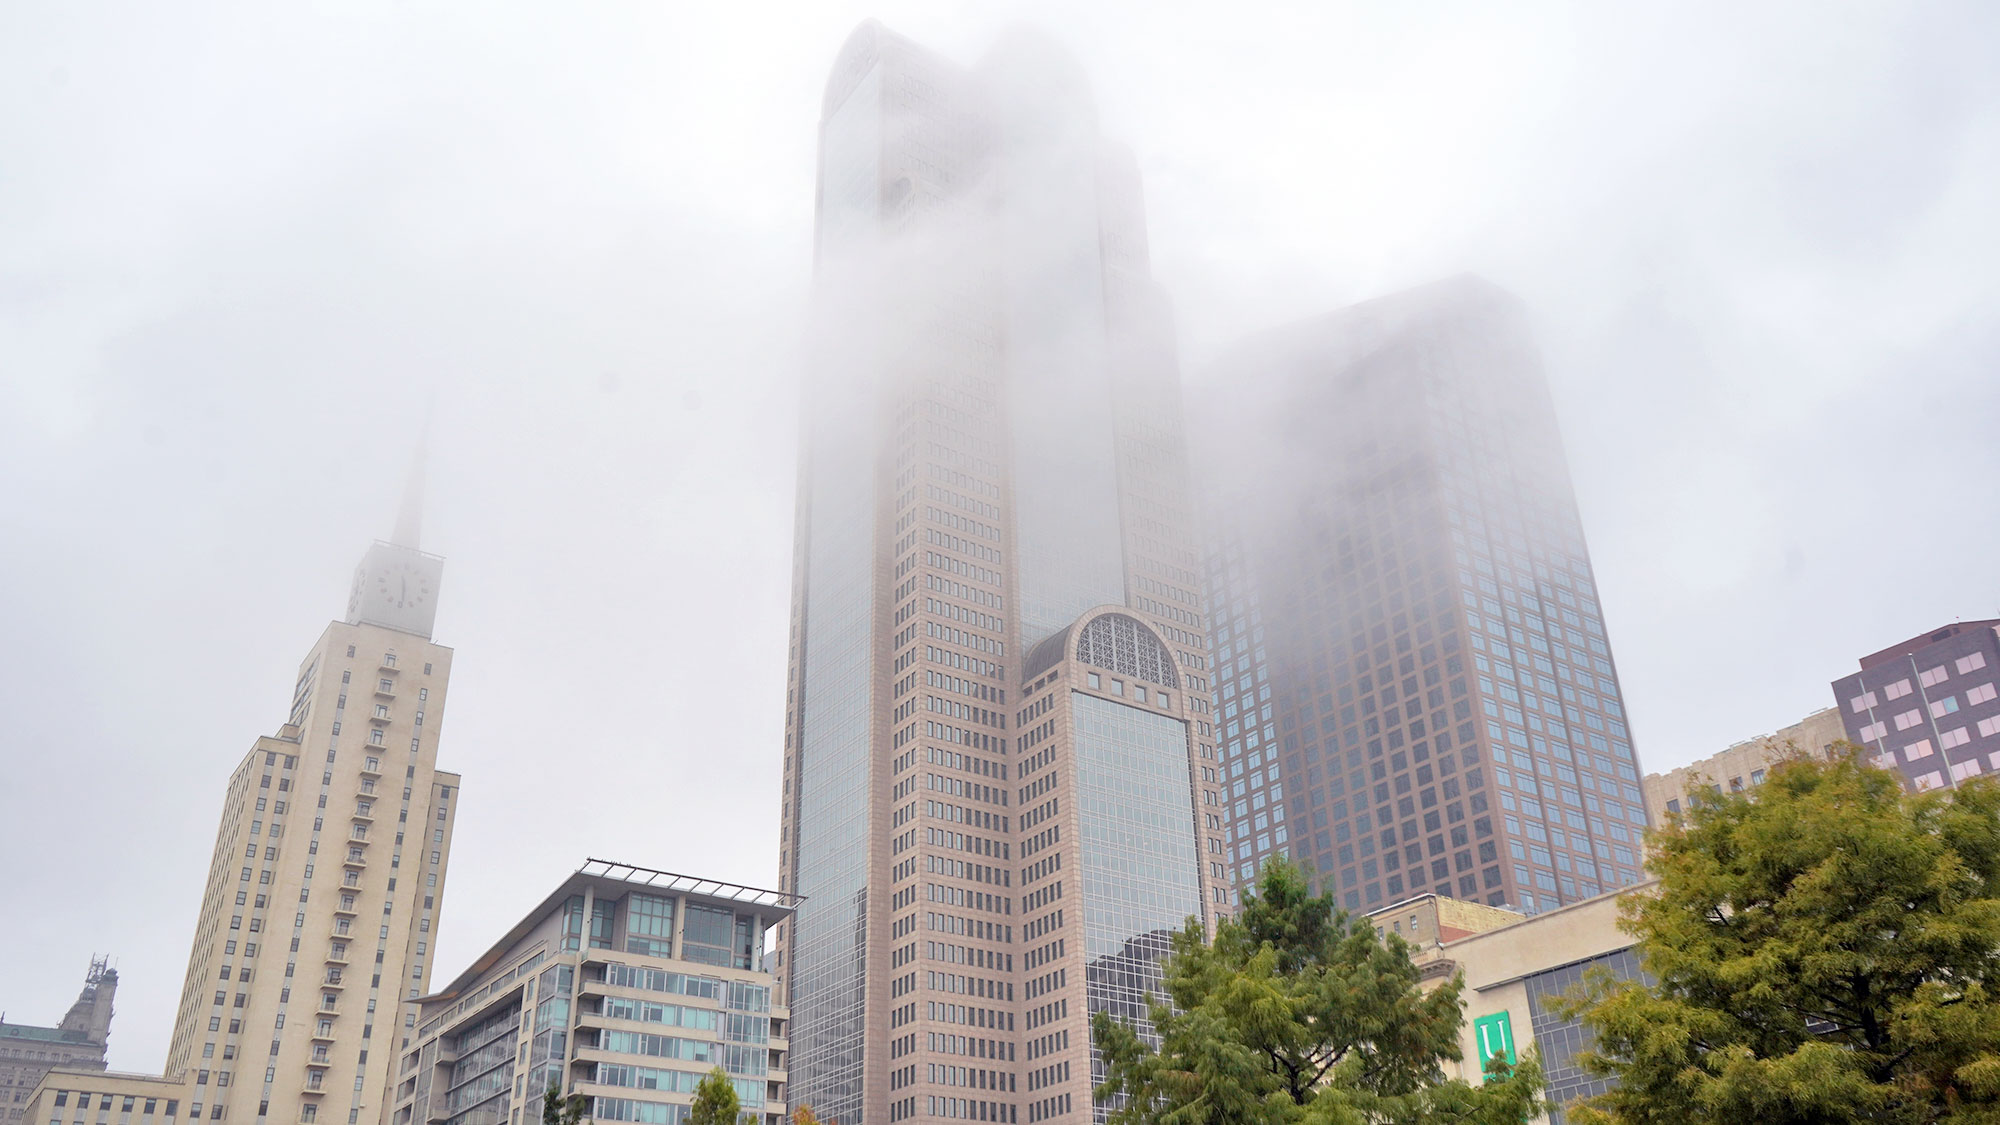 The Comerica Bank Tower in fog.